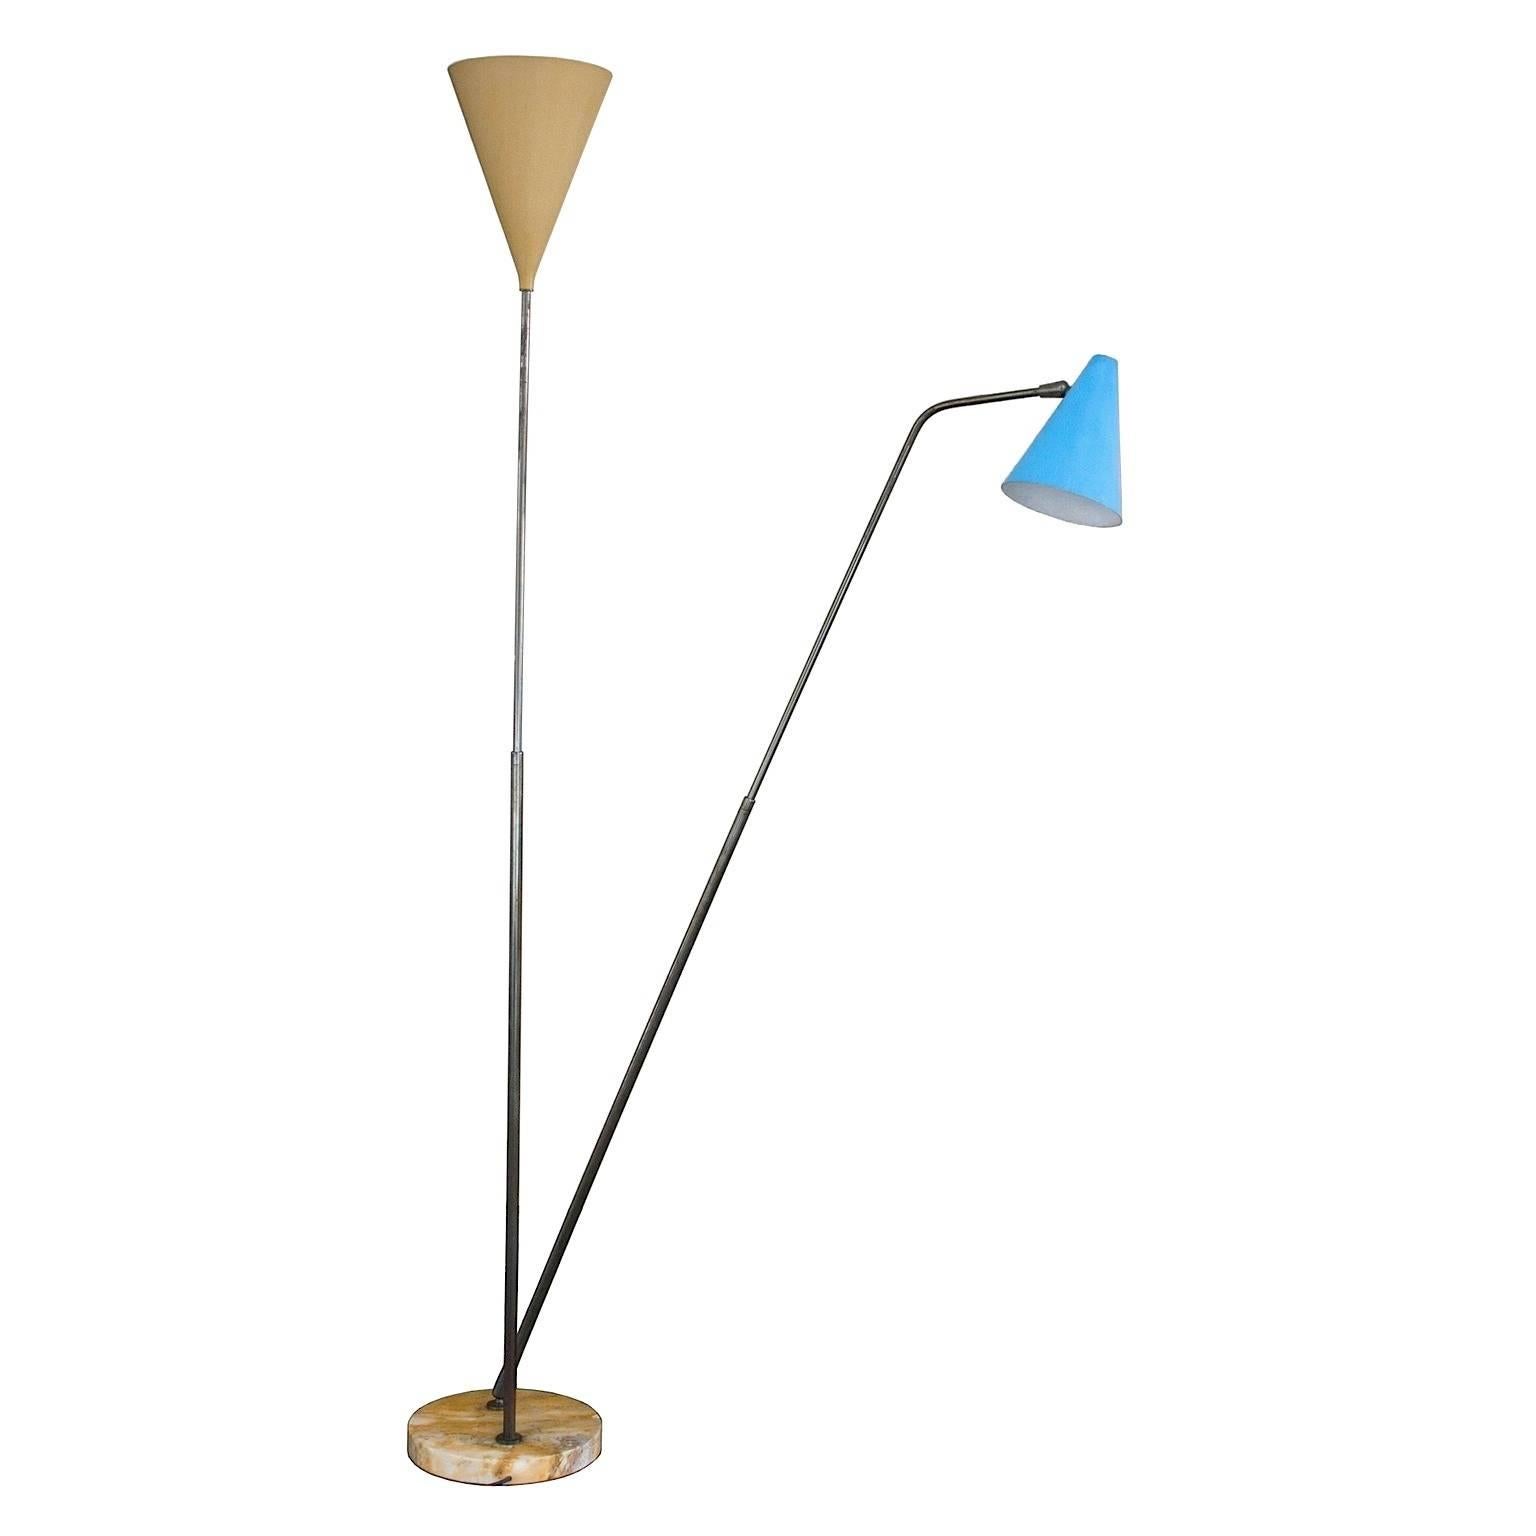 Adjustable and extendible floor lamp. Burnished brass structure, varnished metal diffusors. Designed by Giuseppe Ostuni for Oluce, circa 1950.